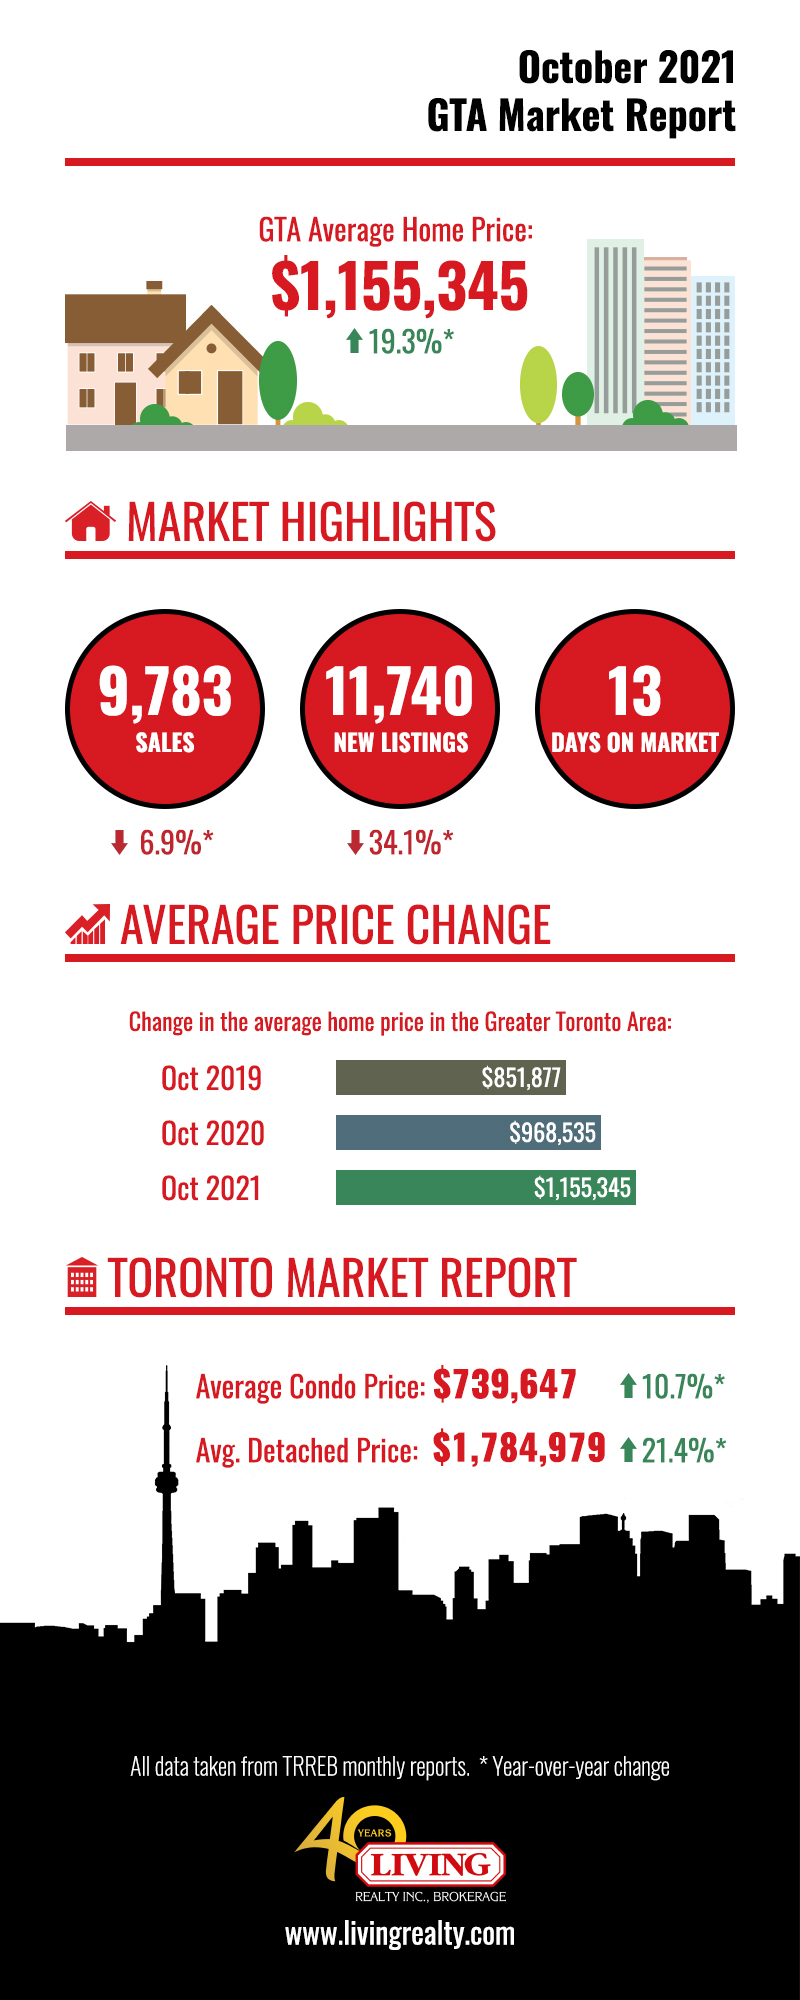 October 2021 housing market numbers for GTA.